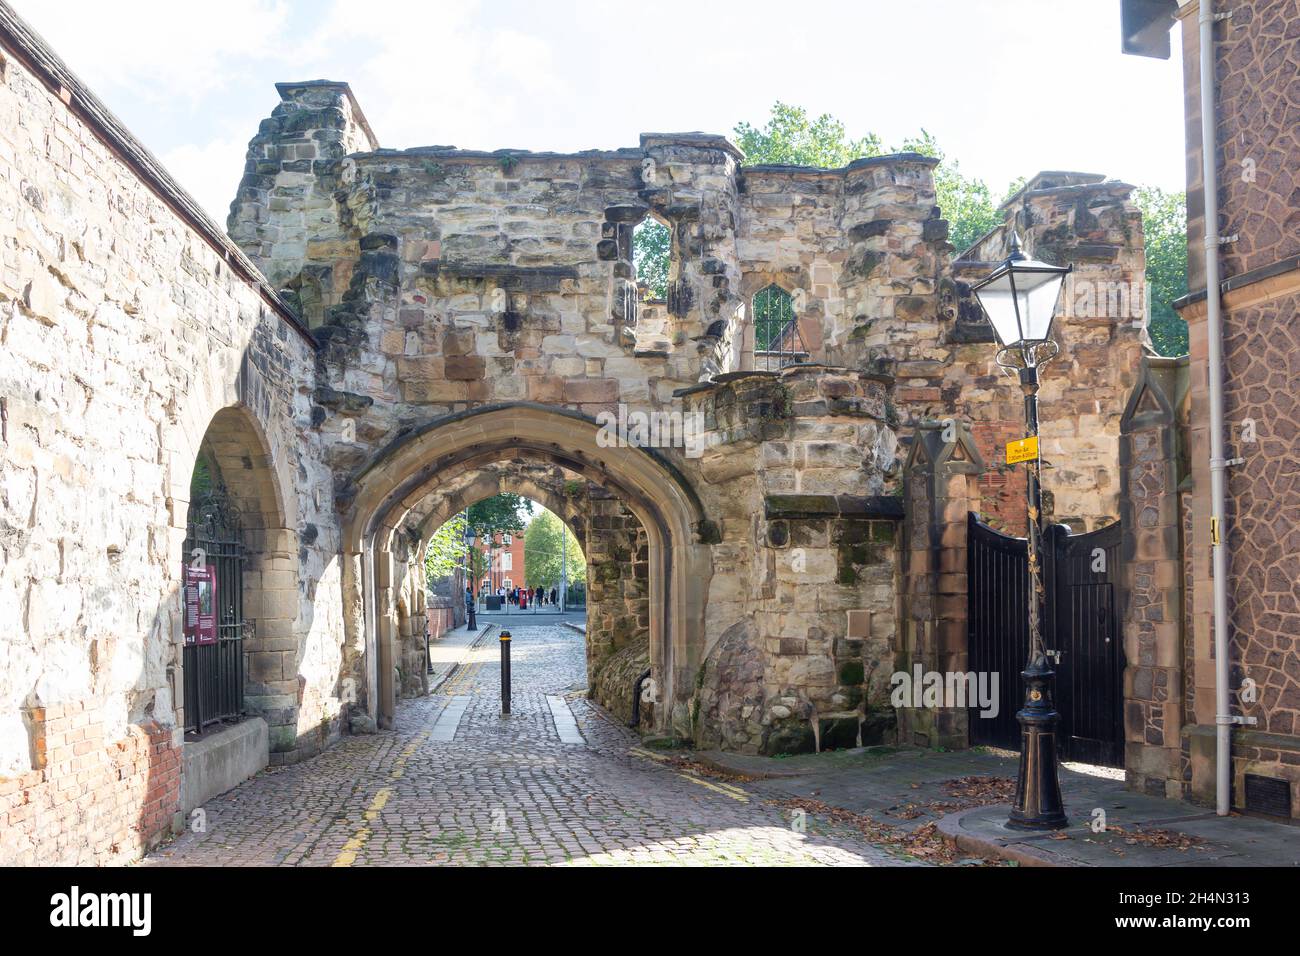 Medieval Turret Gateway, Castle View, City of Leicester, Leicestershire, England, United Kingdom Stock Photo